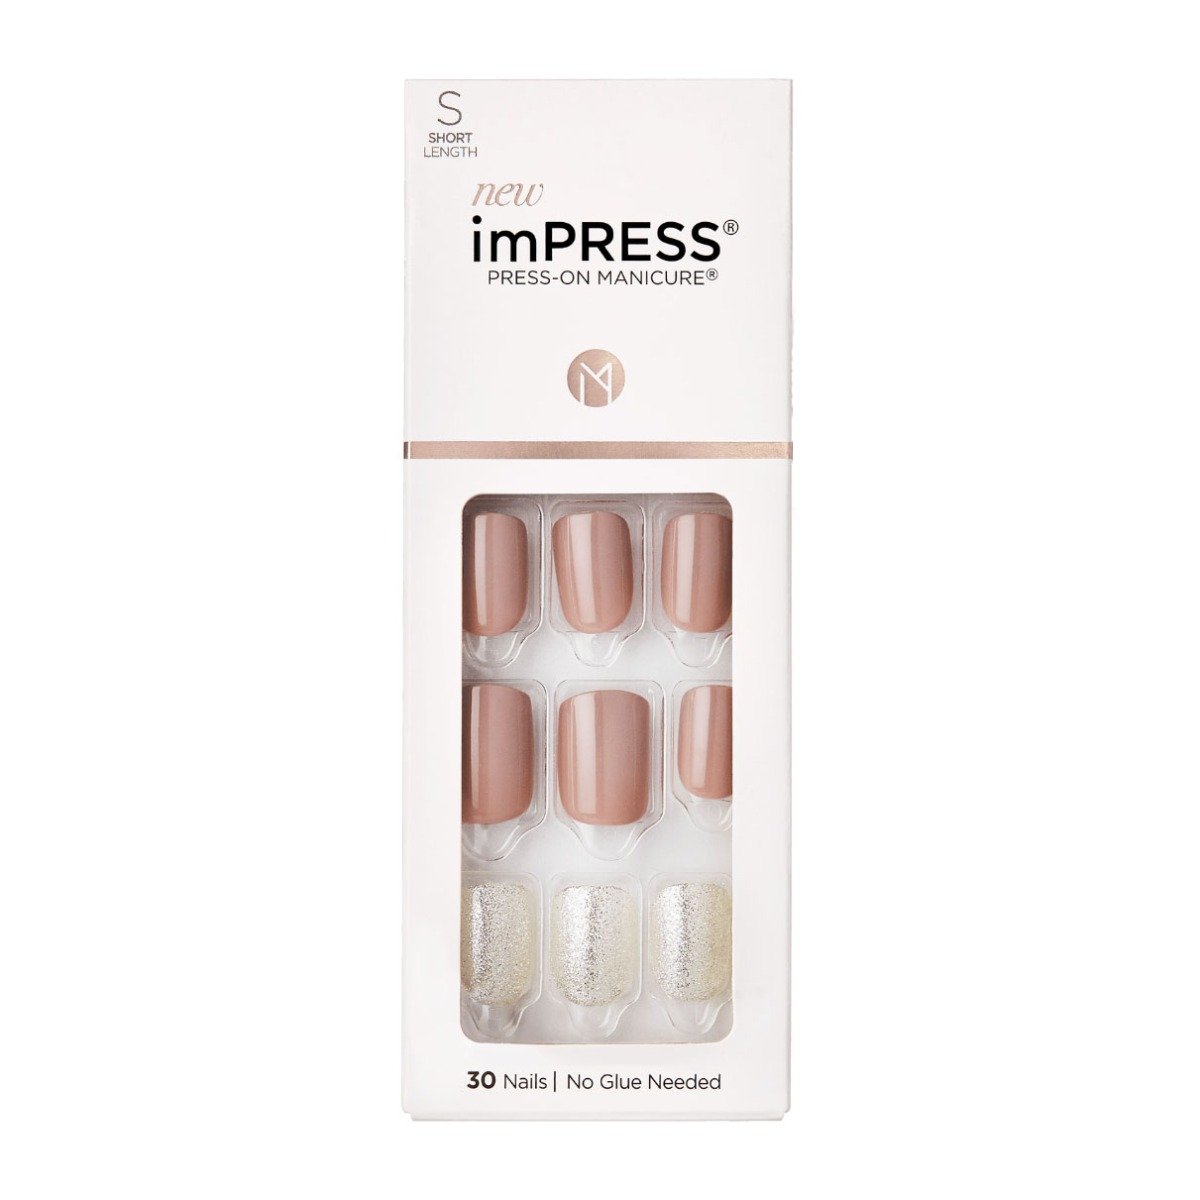 Kiss Impress One More Chance Nails - 83653 - Bloom Pharmacy